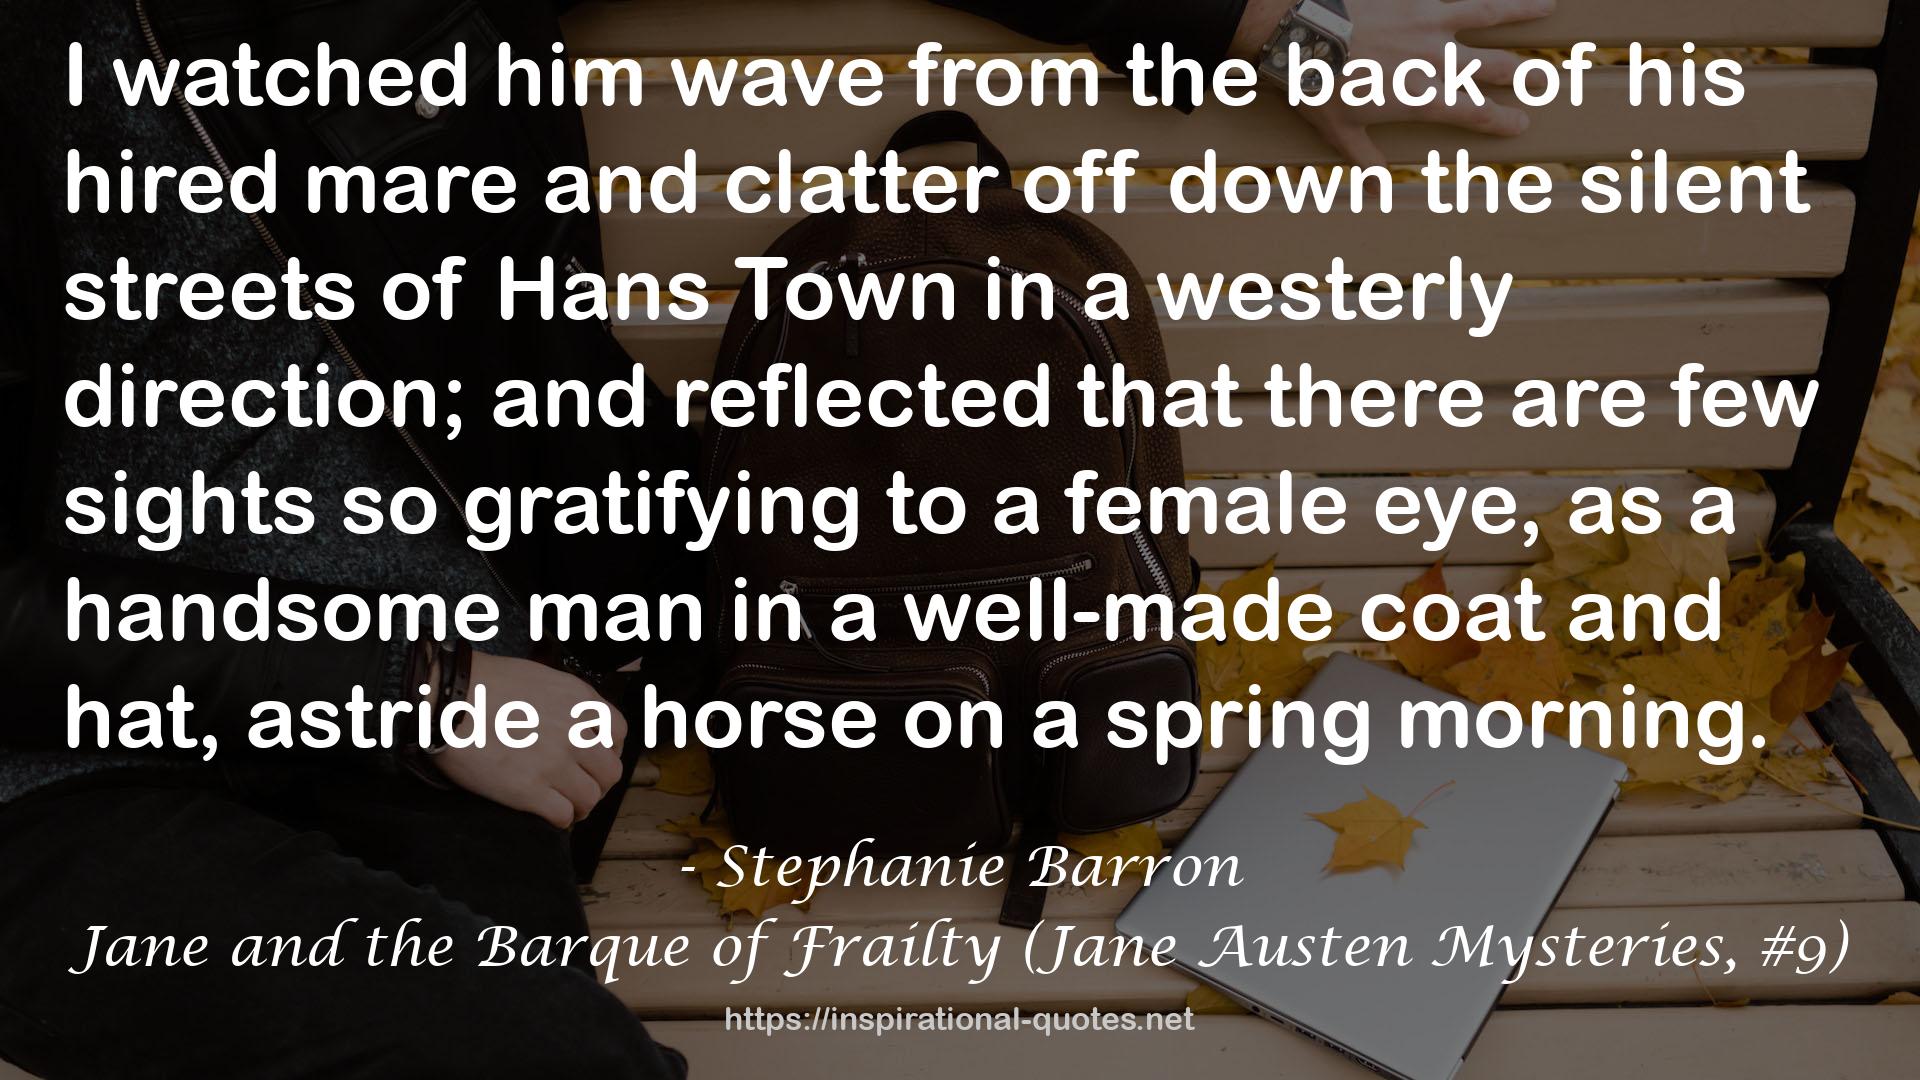 Jane and the Barque of Frailty (Jane Austen Mysteries, #9) QUOTES